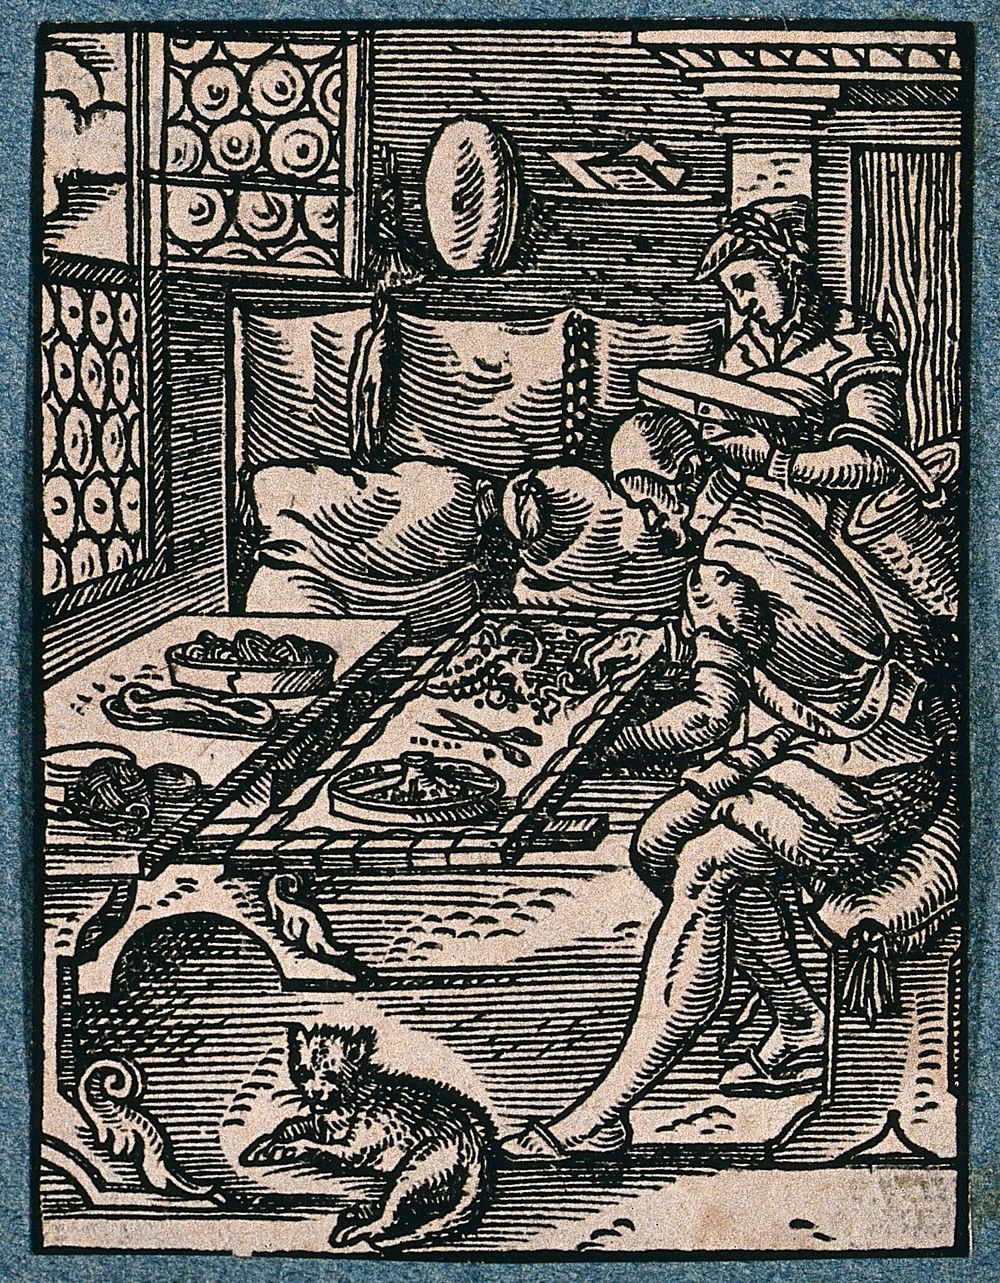 Brocade-makers embroidering a fabric with gold silk and precious stones. Woodcut by J. Amman.